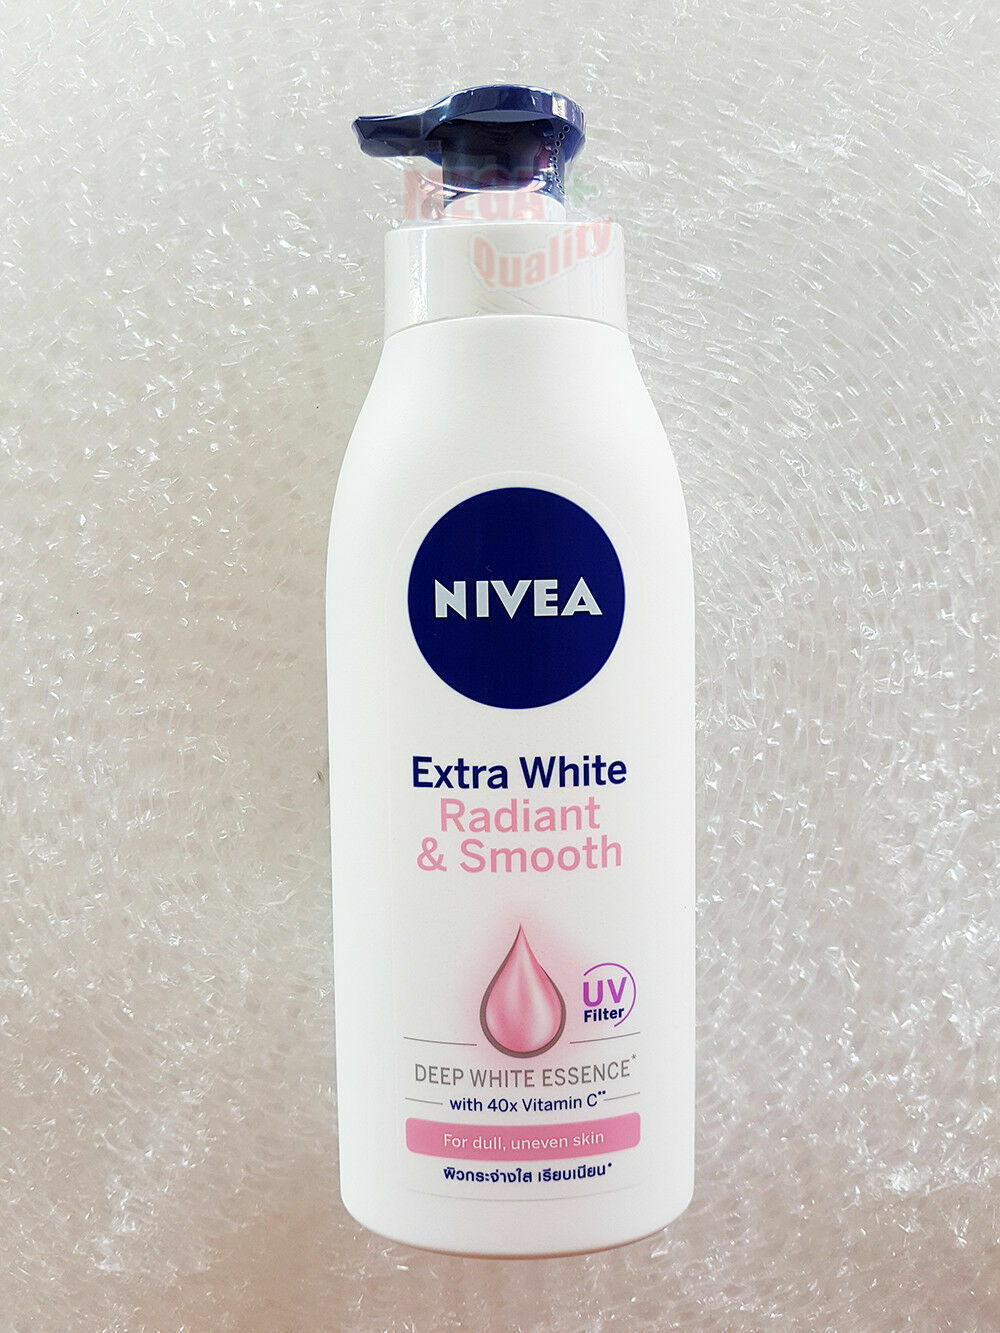 NIVEA Extra White Radiant & Smooth Body Lotion - 400ml, Lot of 2